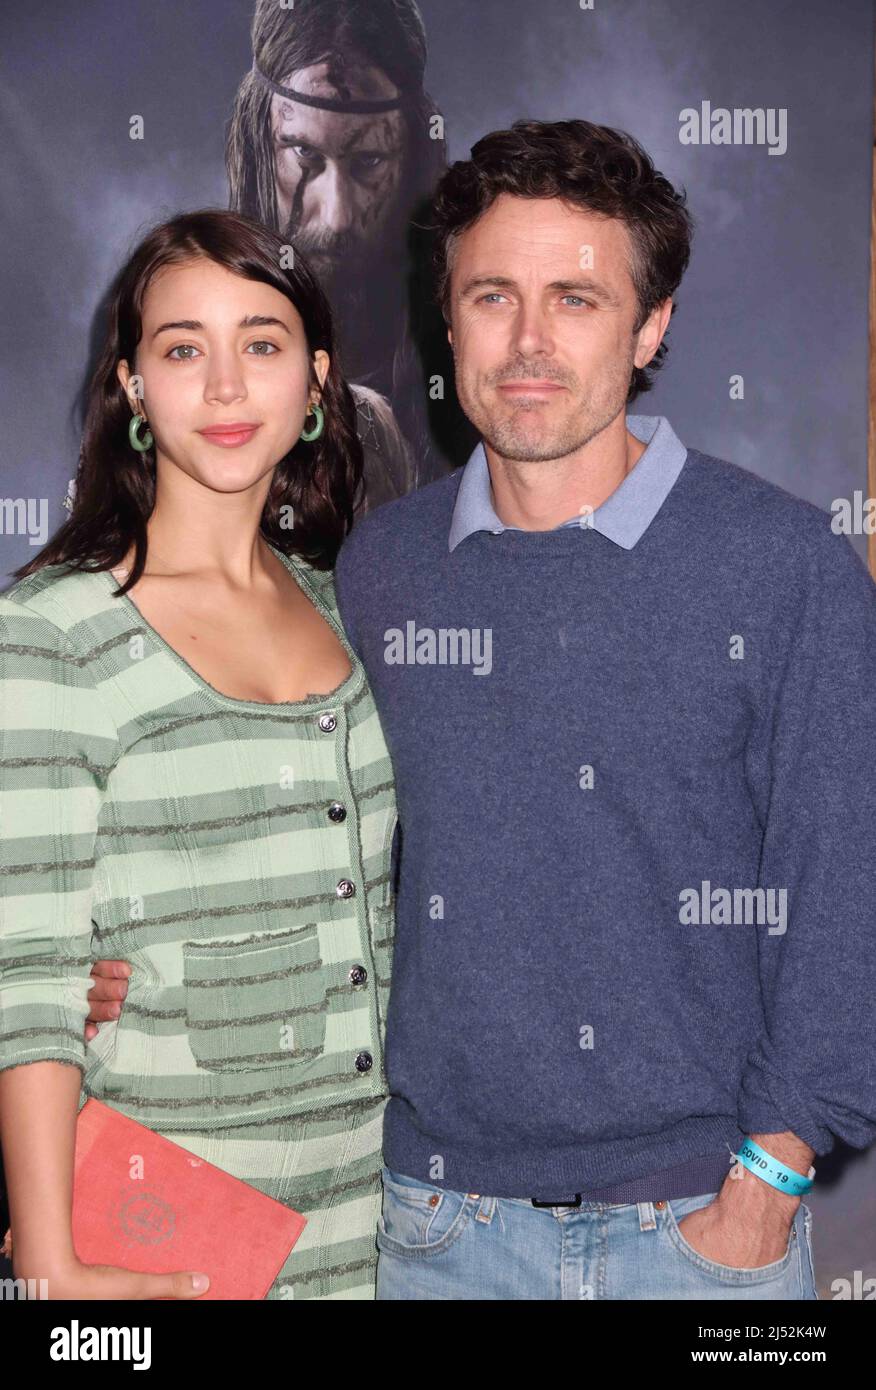 Casey Affleck Makes His Relationship With Love Caylee Cowan